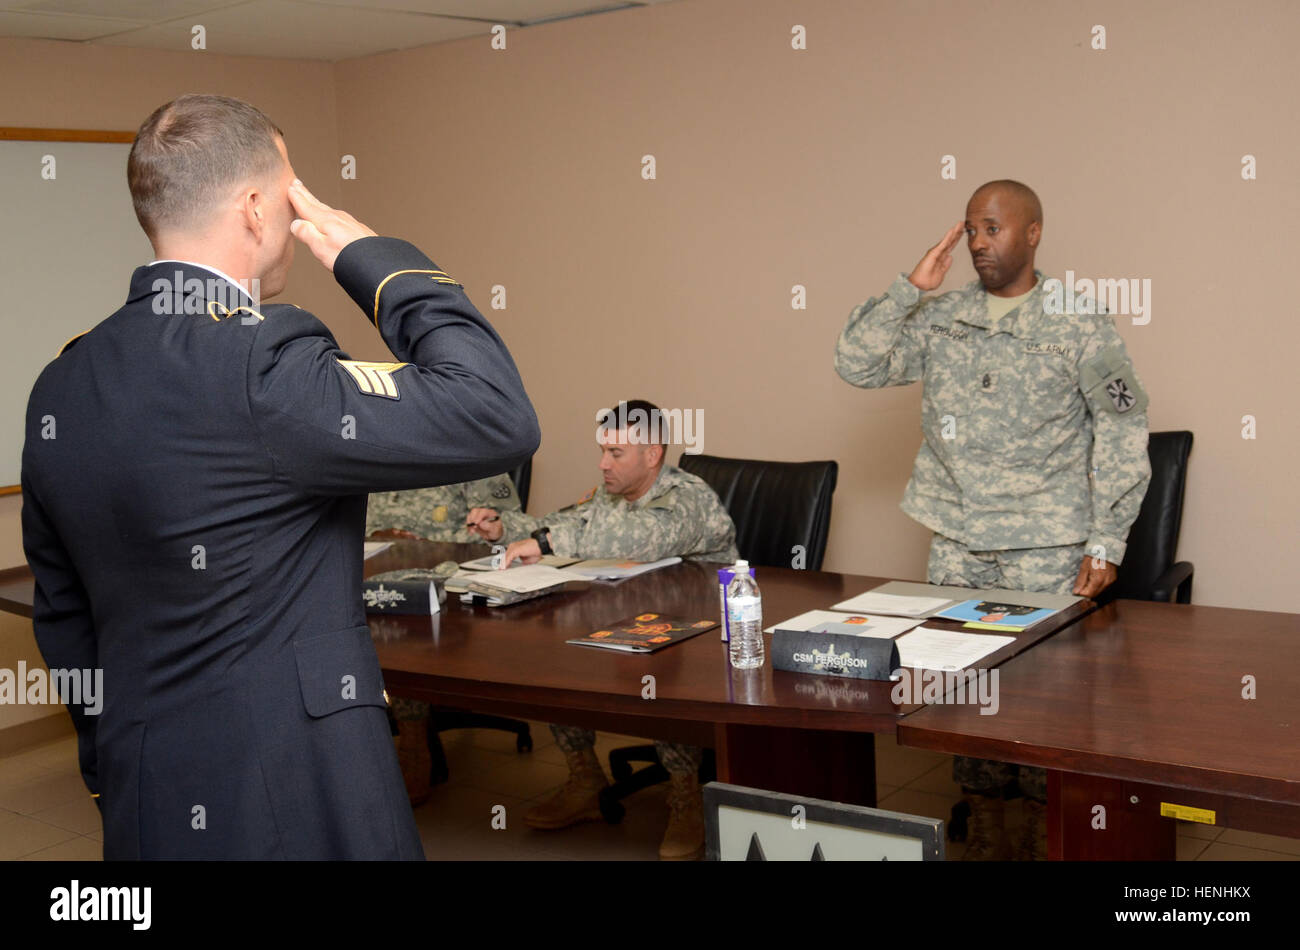 Army Sgt. Michael Sciandra (Left), 1st Battalion, 43rd Air Defense Artillery, salutes the president of a board, Command Sgt. Maj. Byron E. Ferguson, 11th Air Defense Artillery Brigade command sergeant major, during the 32nd Army Air and Missile Defense Command's Blackjack Warrior Competition leadership board at Fort Bliss, Texas, June 2. The 32d AAMDC conducts the Blackjack Warrior Competition each year to identify and recognize Soldiers, noncommissioned officers and officers throughout the command who posses exemplary qualities, warrior ethos, and tactical proficiency. (U.S. Army photo by Sgt Stock Photo